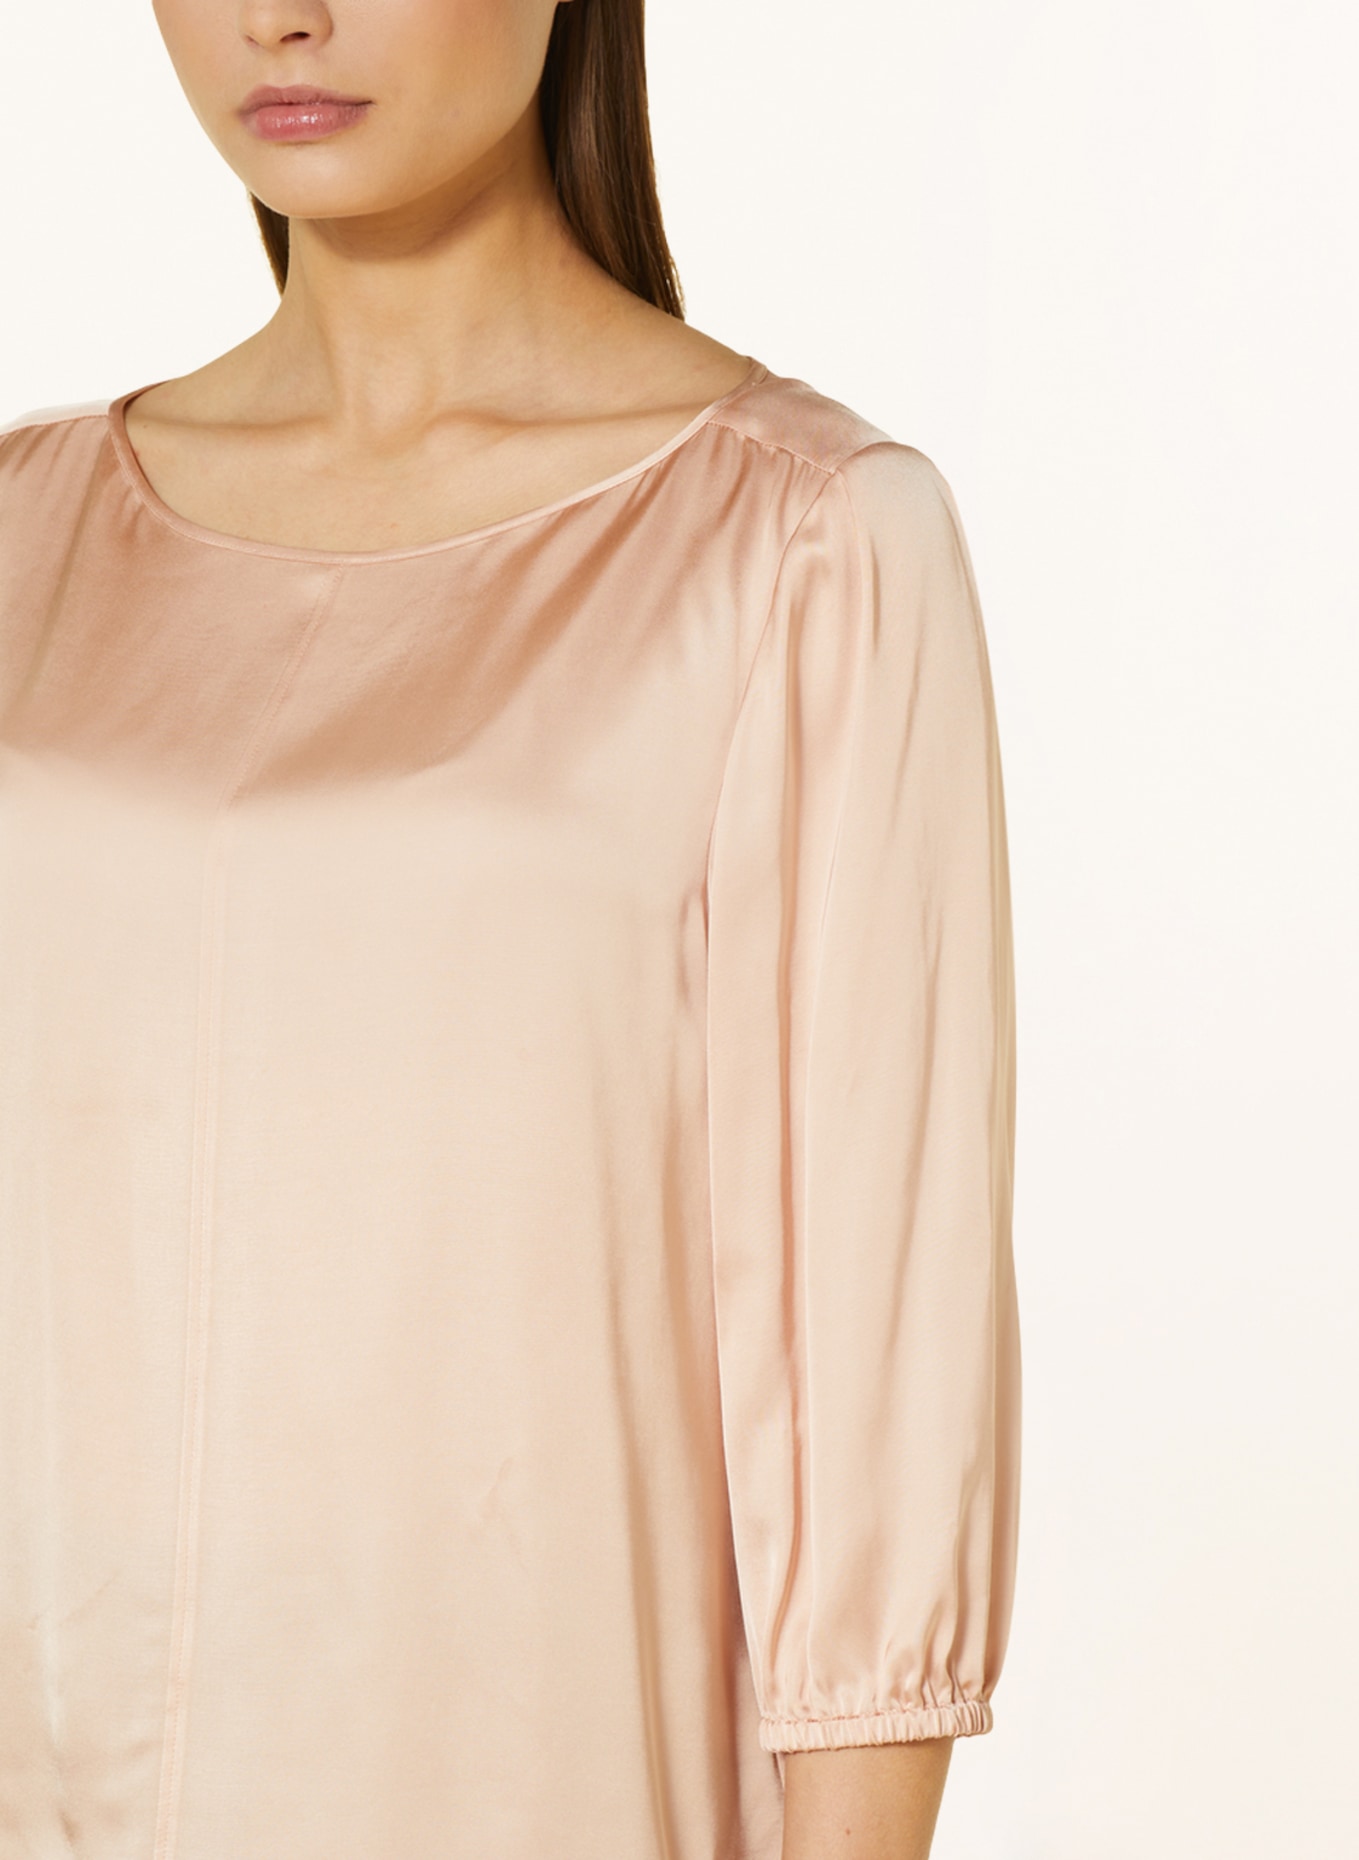 MARC CAIN Shirt blouse made of satin with 3/4 sleeves, Color: 209 sandy beige (Image 4)